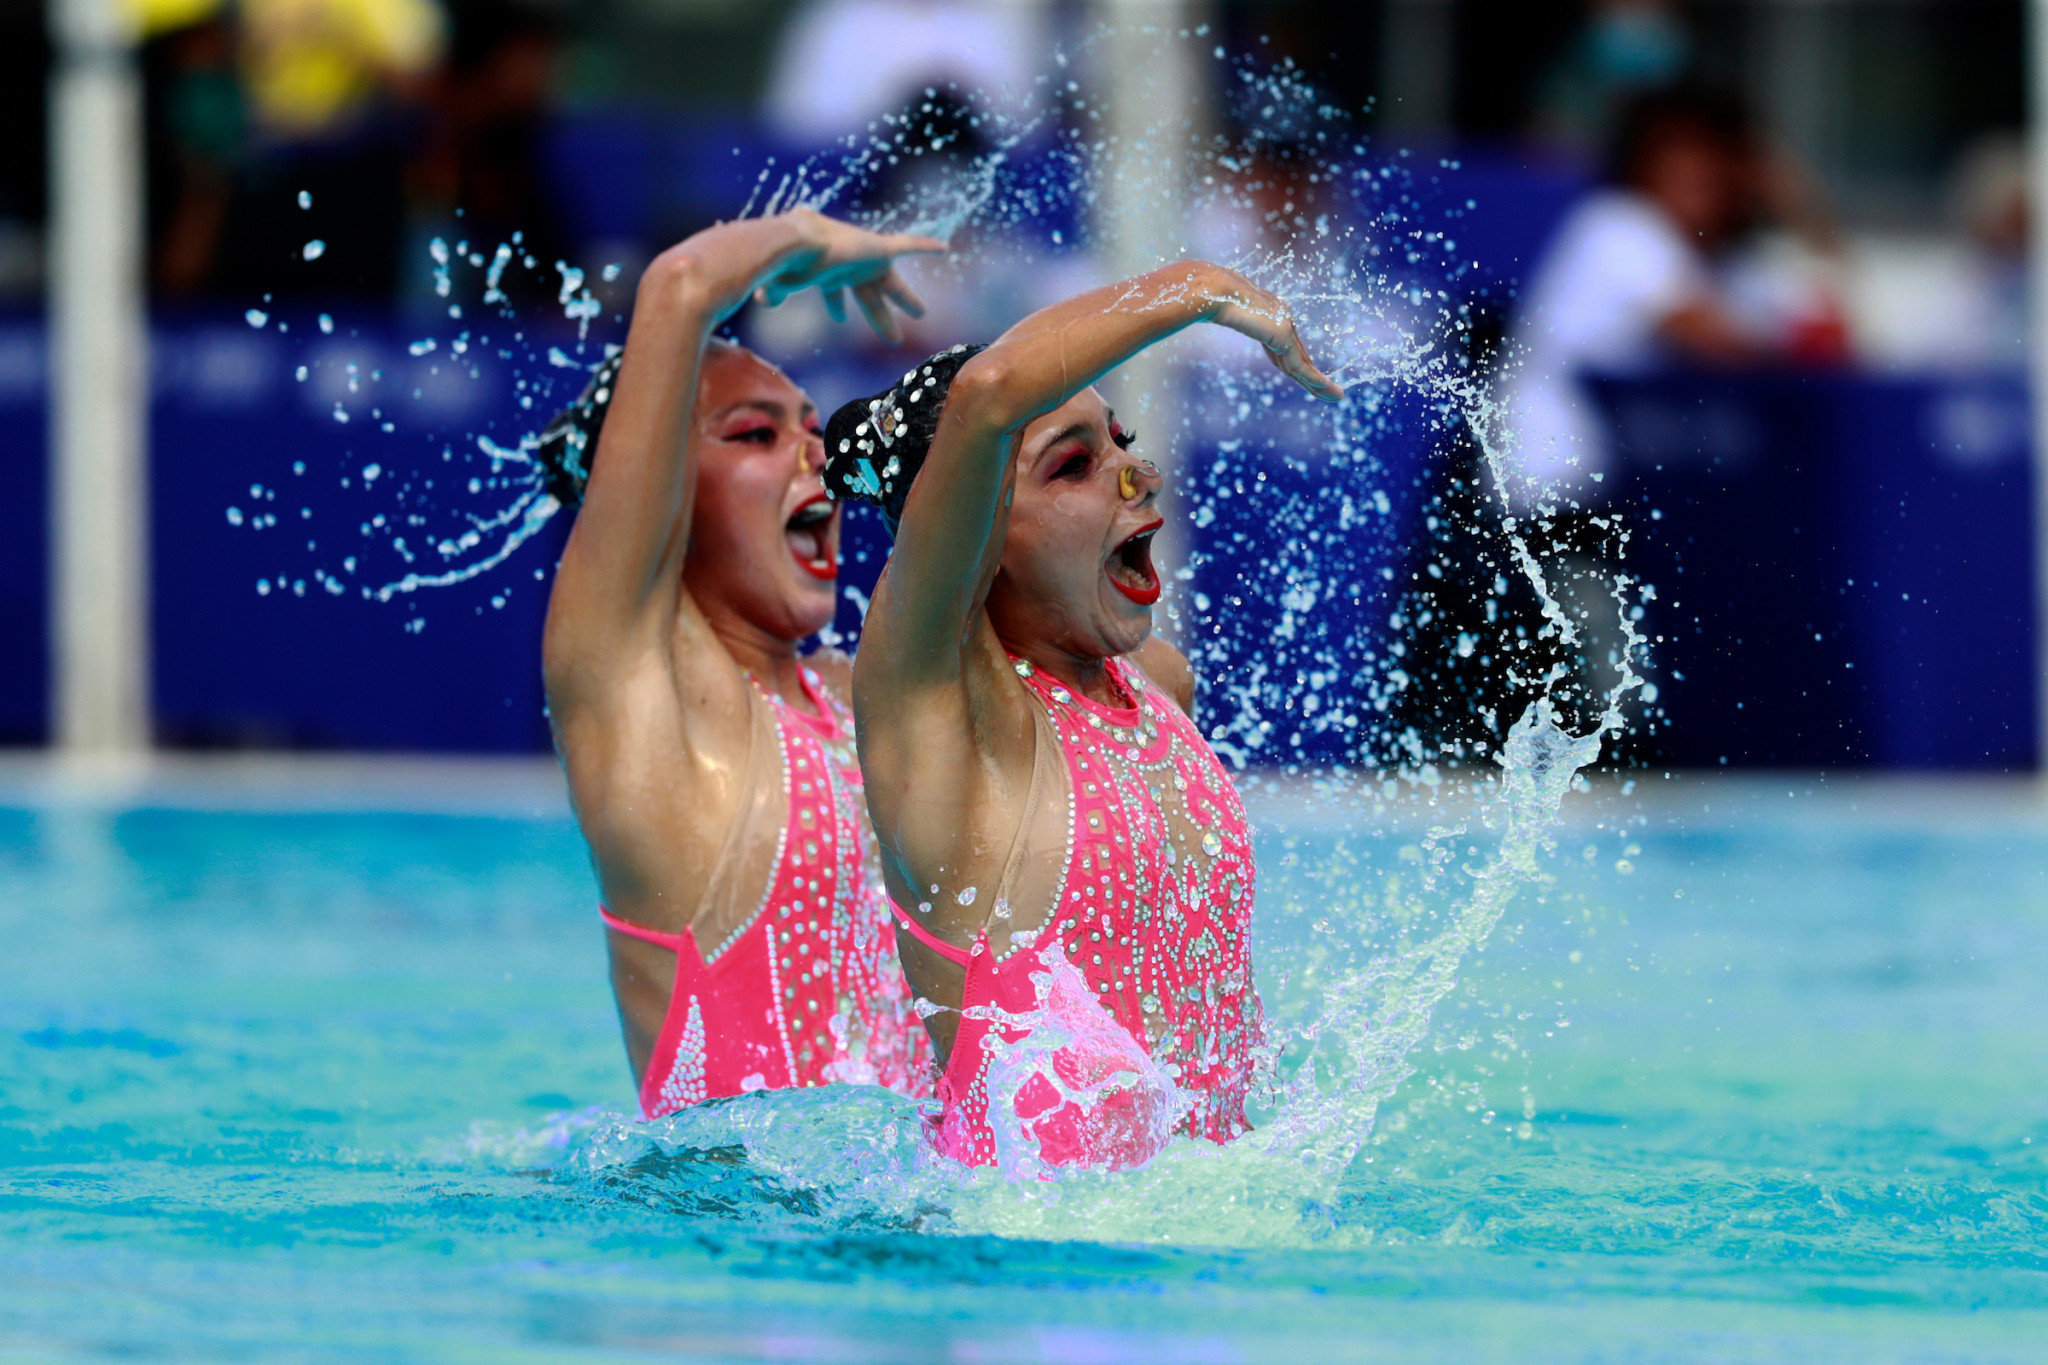 Mexico won gold in the artistic swimming women's duet final with a score of 82.2000 ©Agencia.Xpress Media